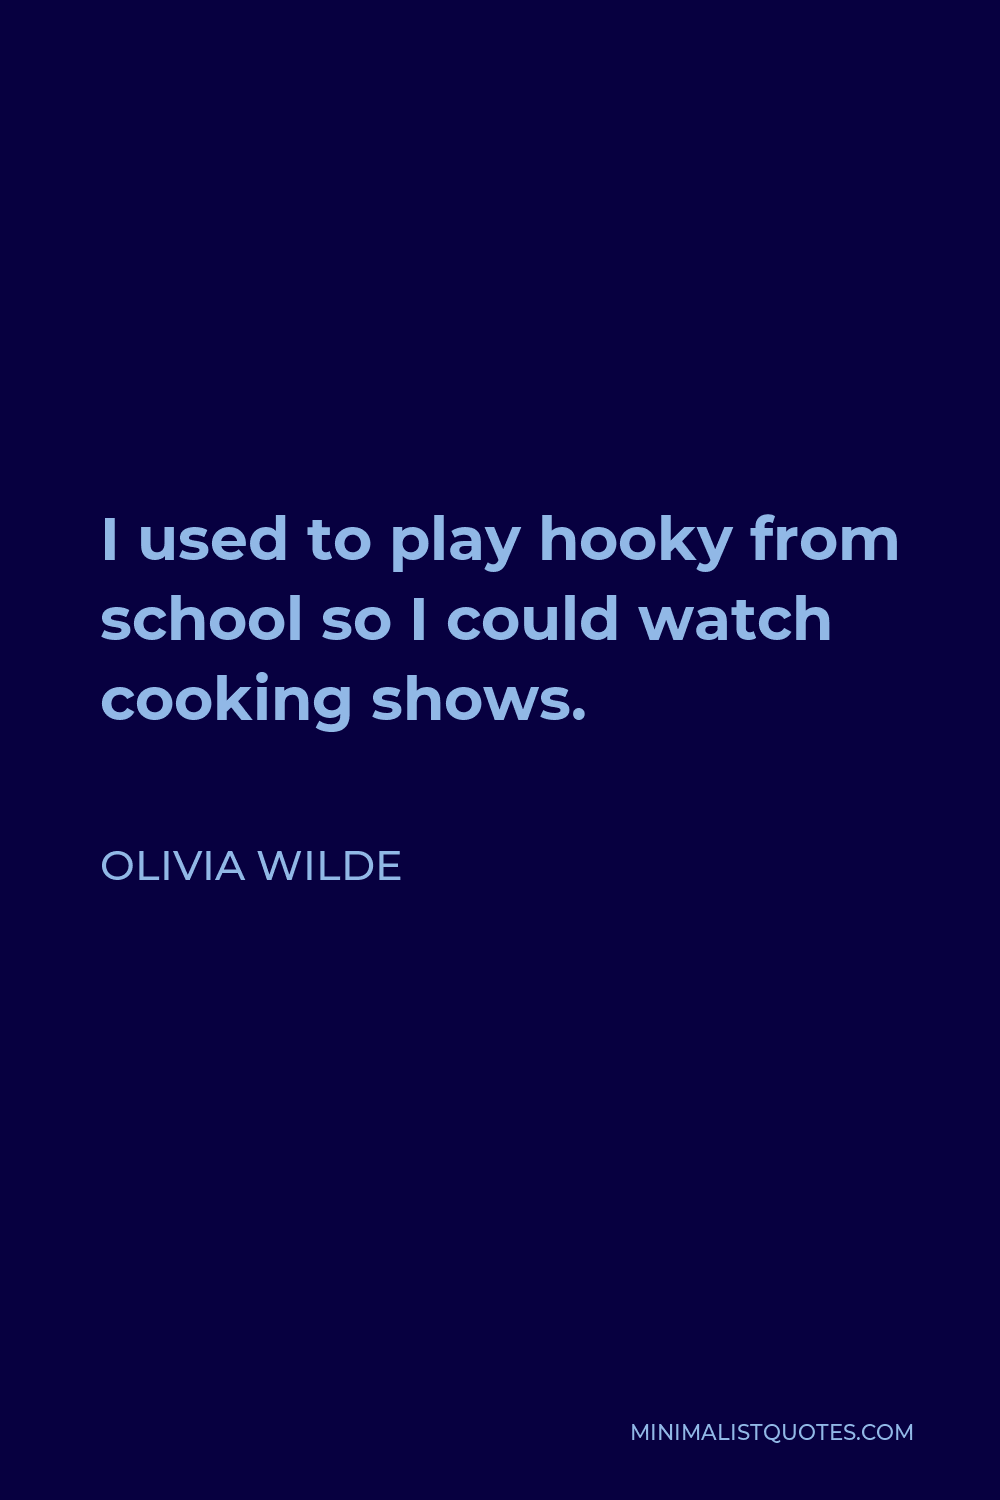 Olivia Wilde Quote - I used to play hooky from school so I could watch cooking shows.